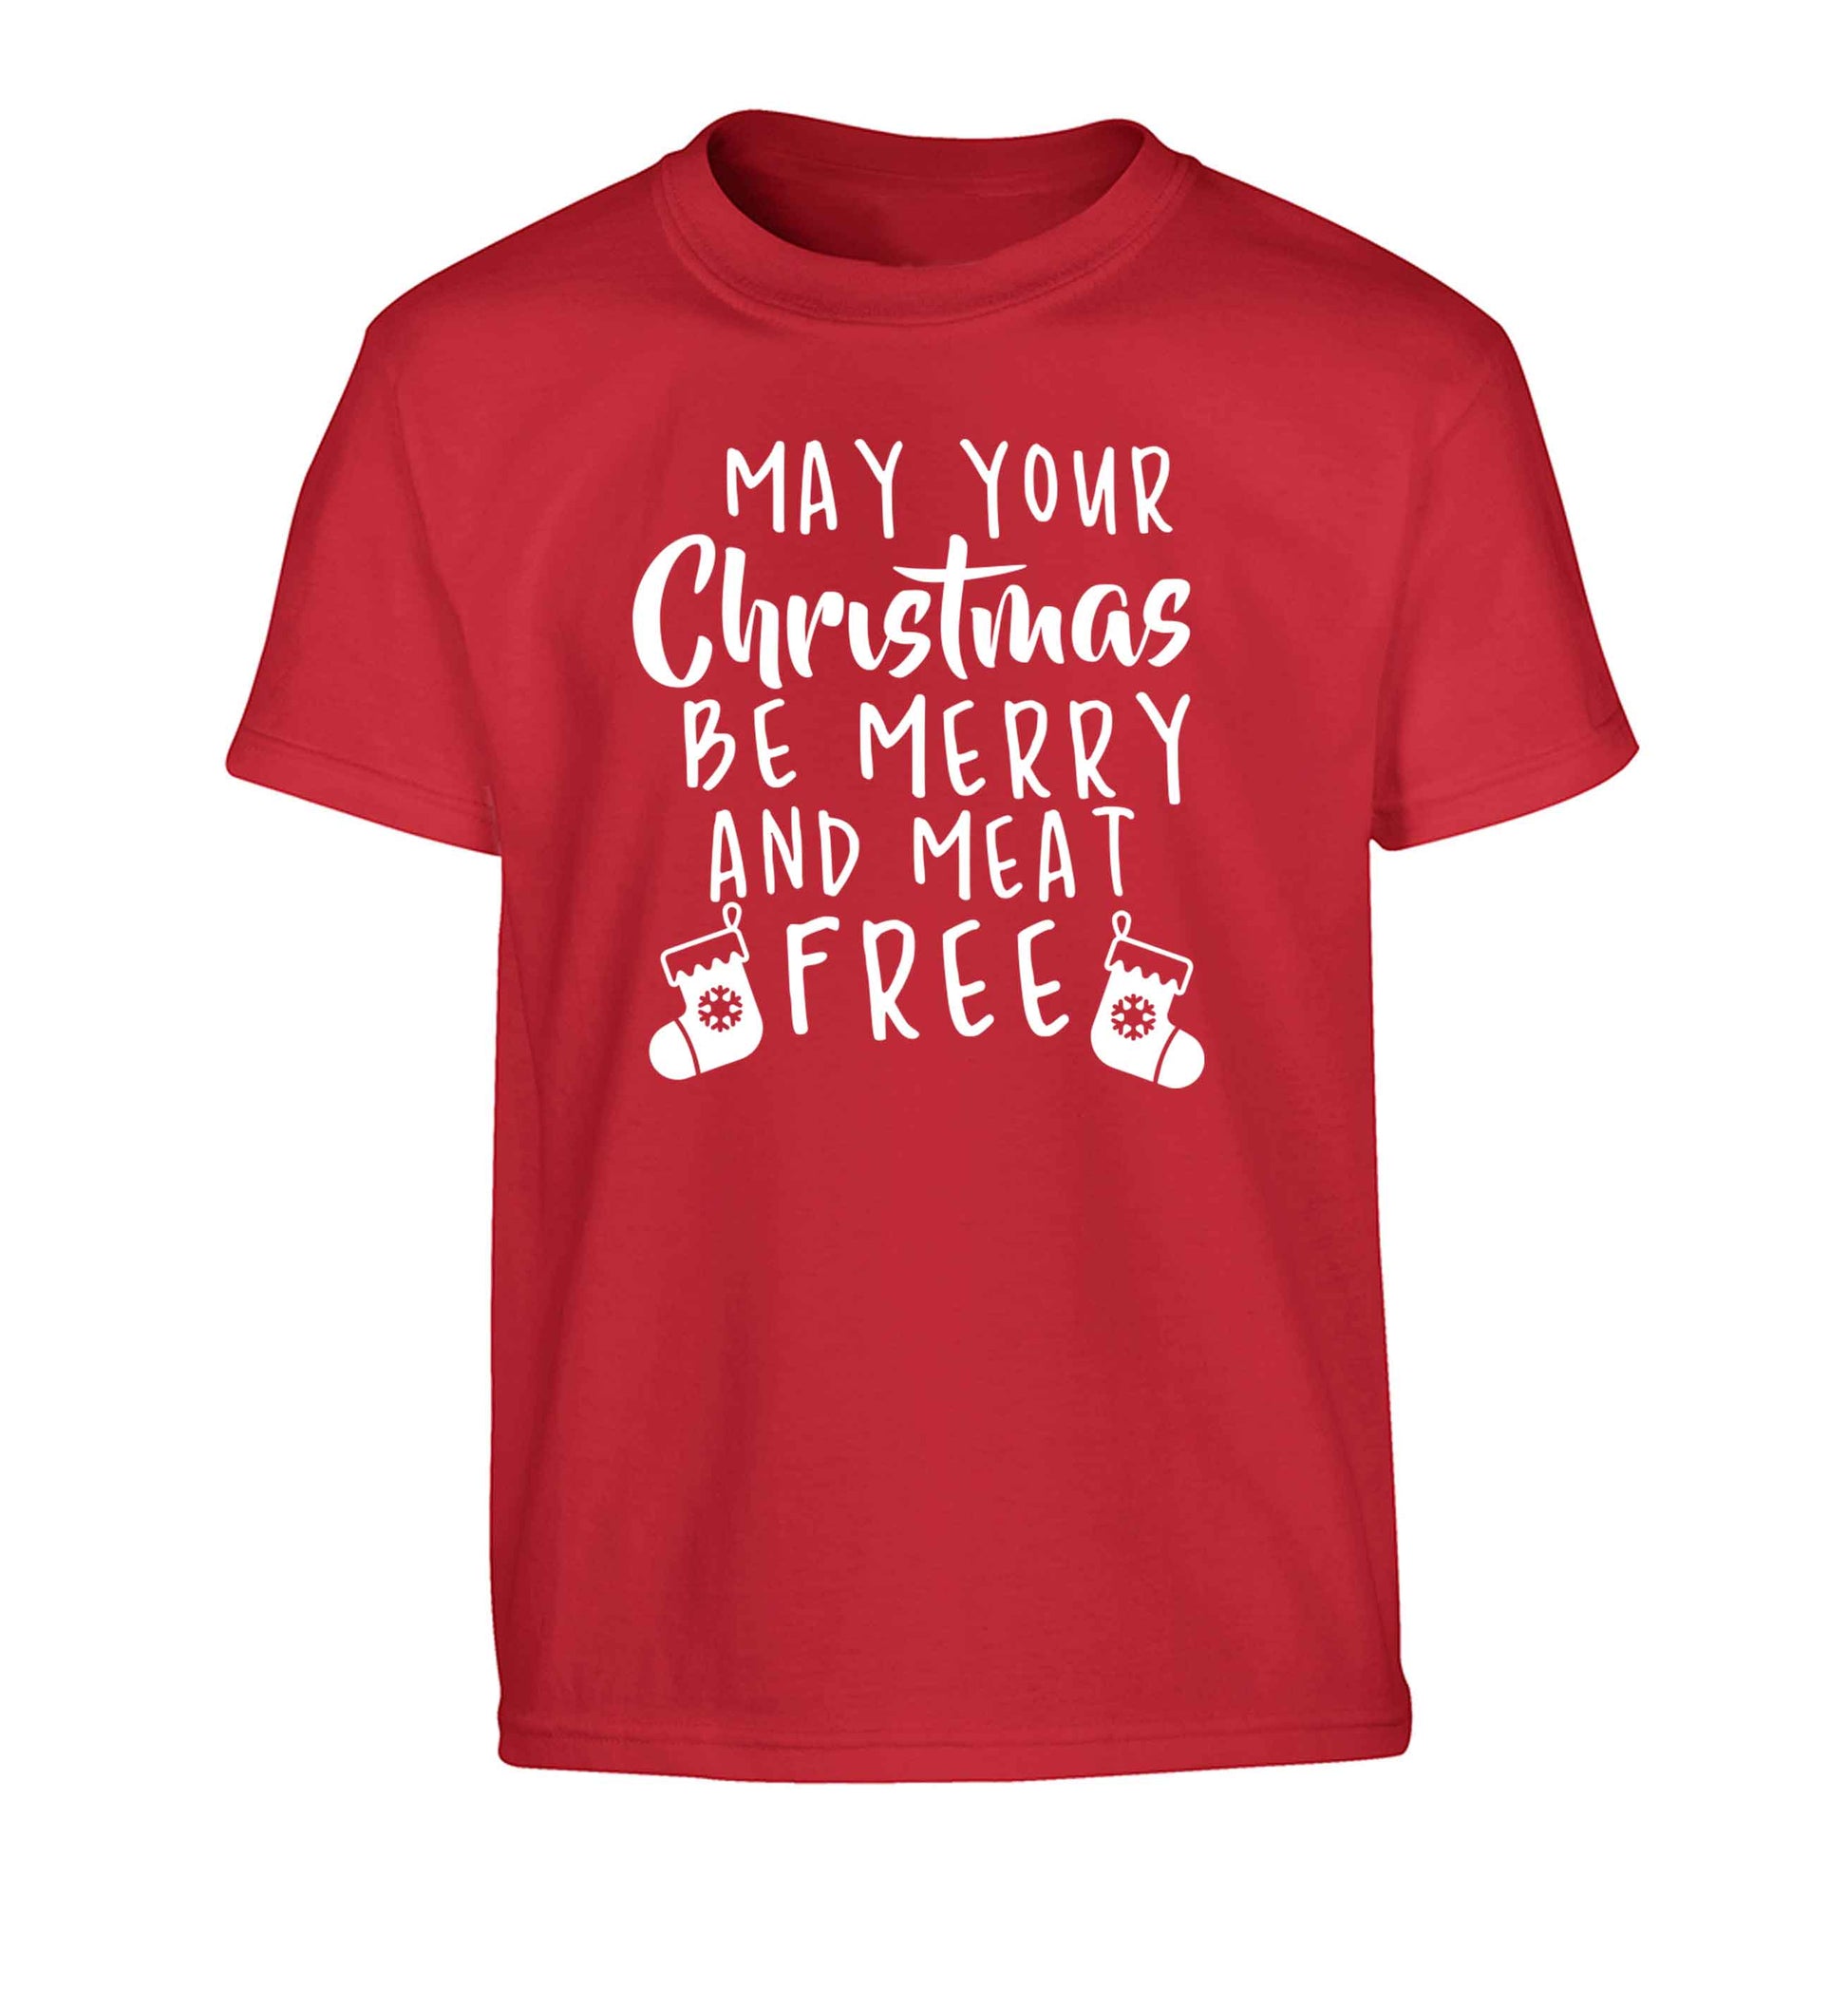 May your Christmas be merry and meat free Children's red Tshirt 12-13 Years